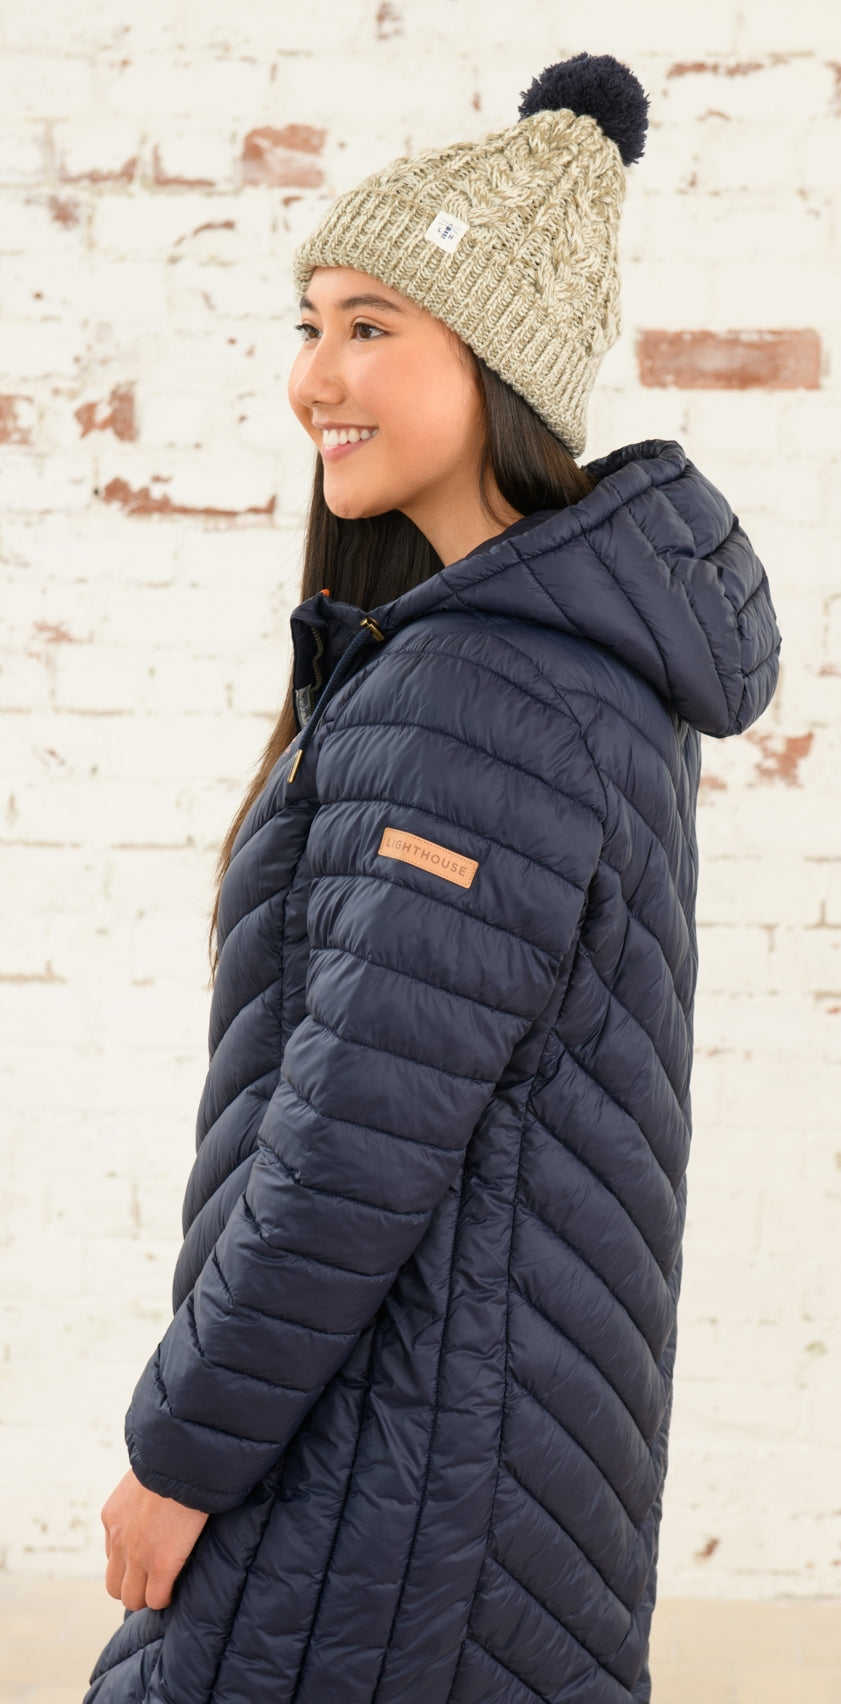 Women's Laurel padded puffer jacket in Navy from Lighthouse.